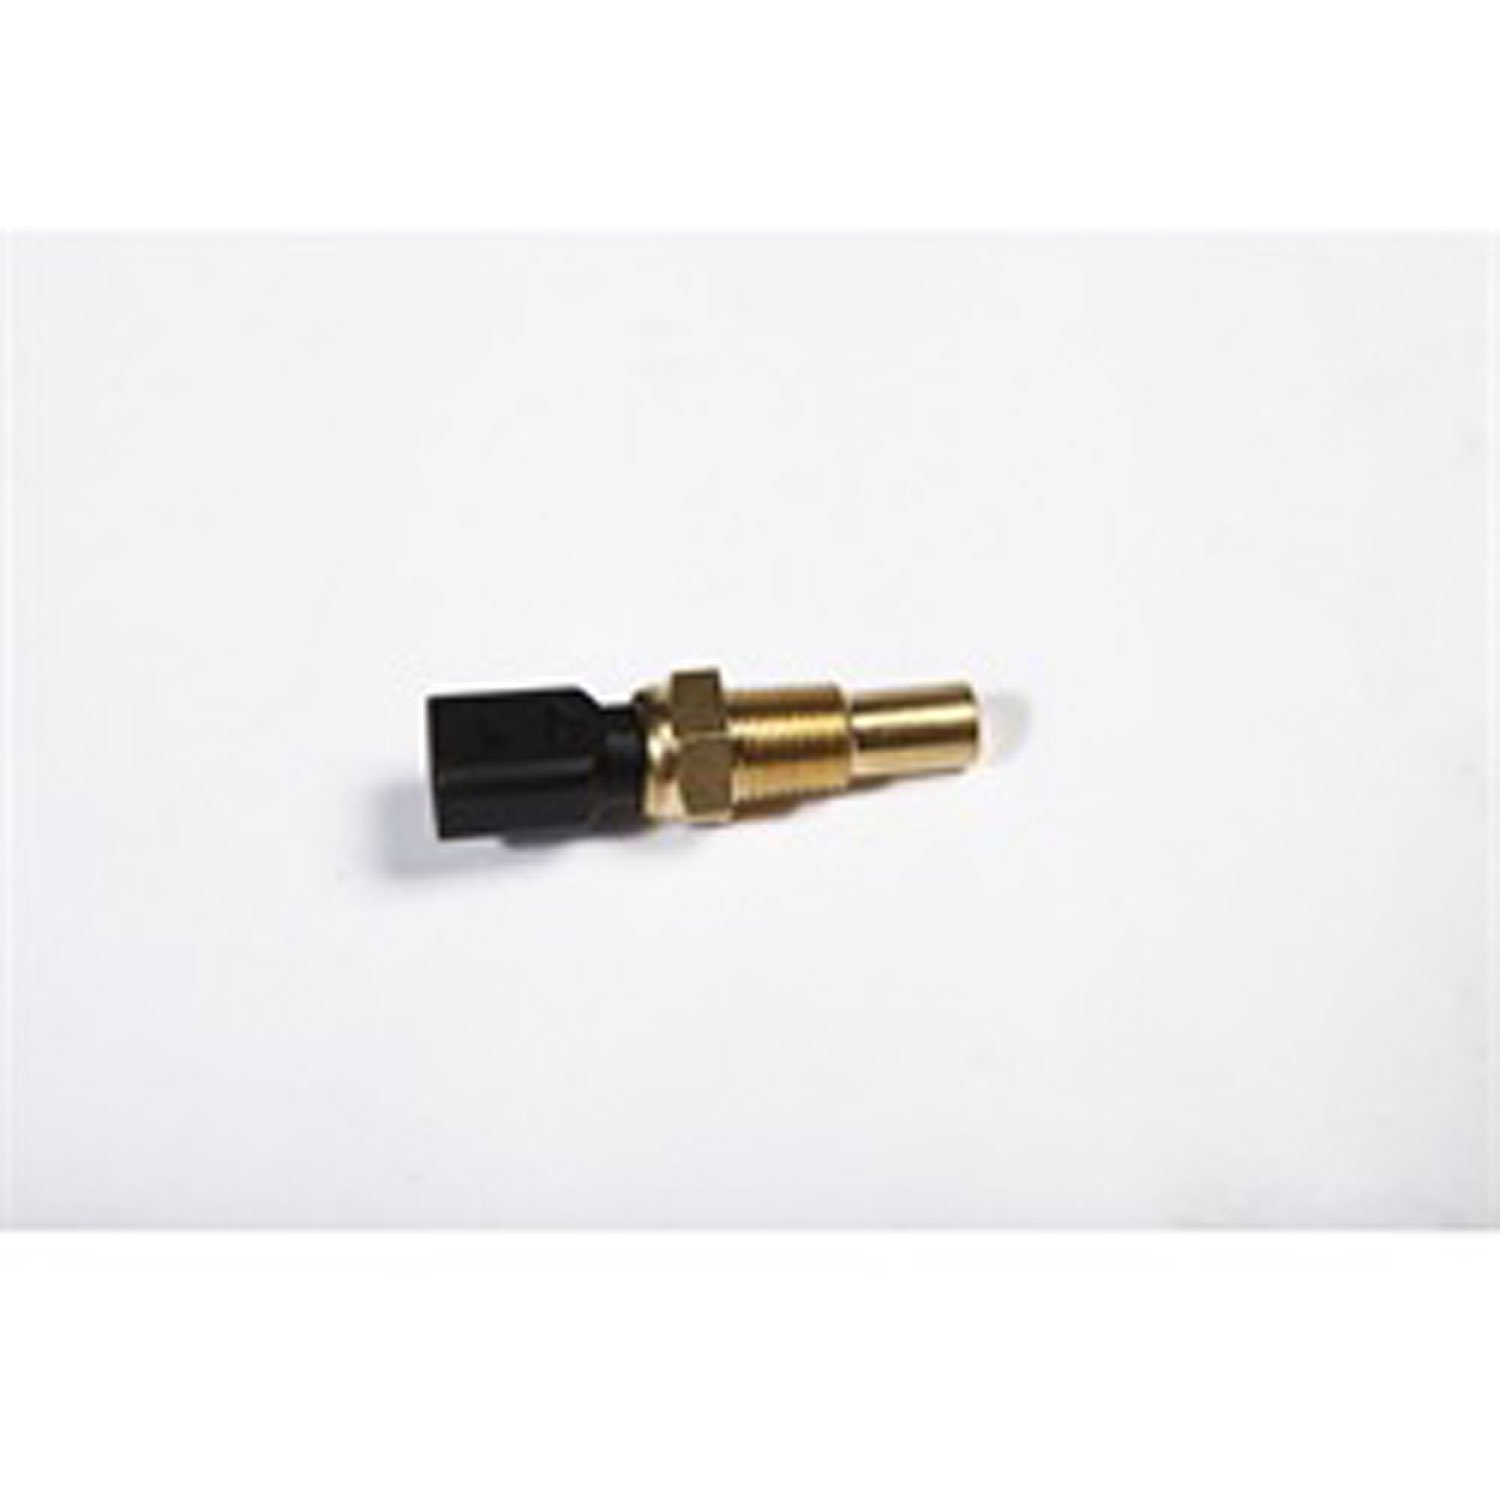 This temperature sensor with Warning light from Omix-ADA fits 92-96 Jeep Cherokees Grand Cherokees and Wrangler.